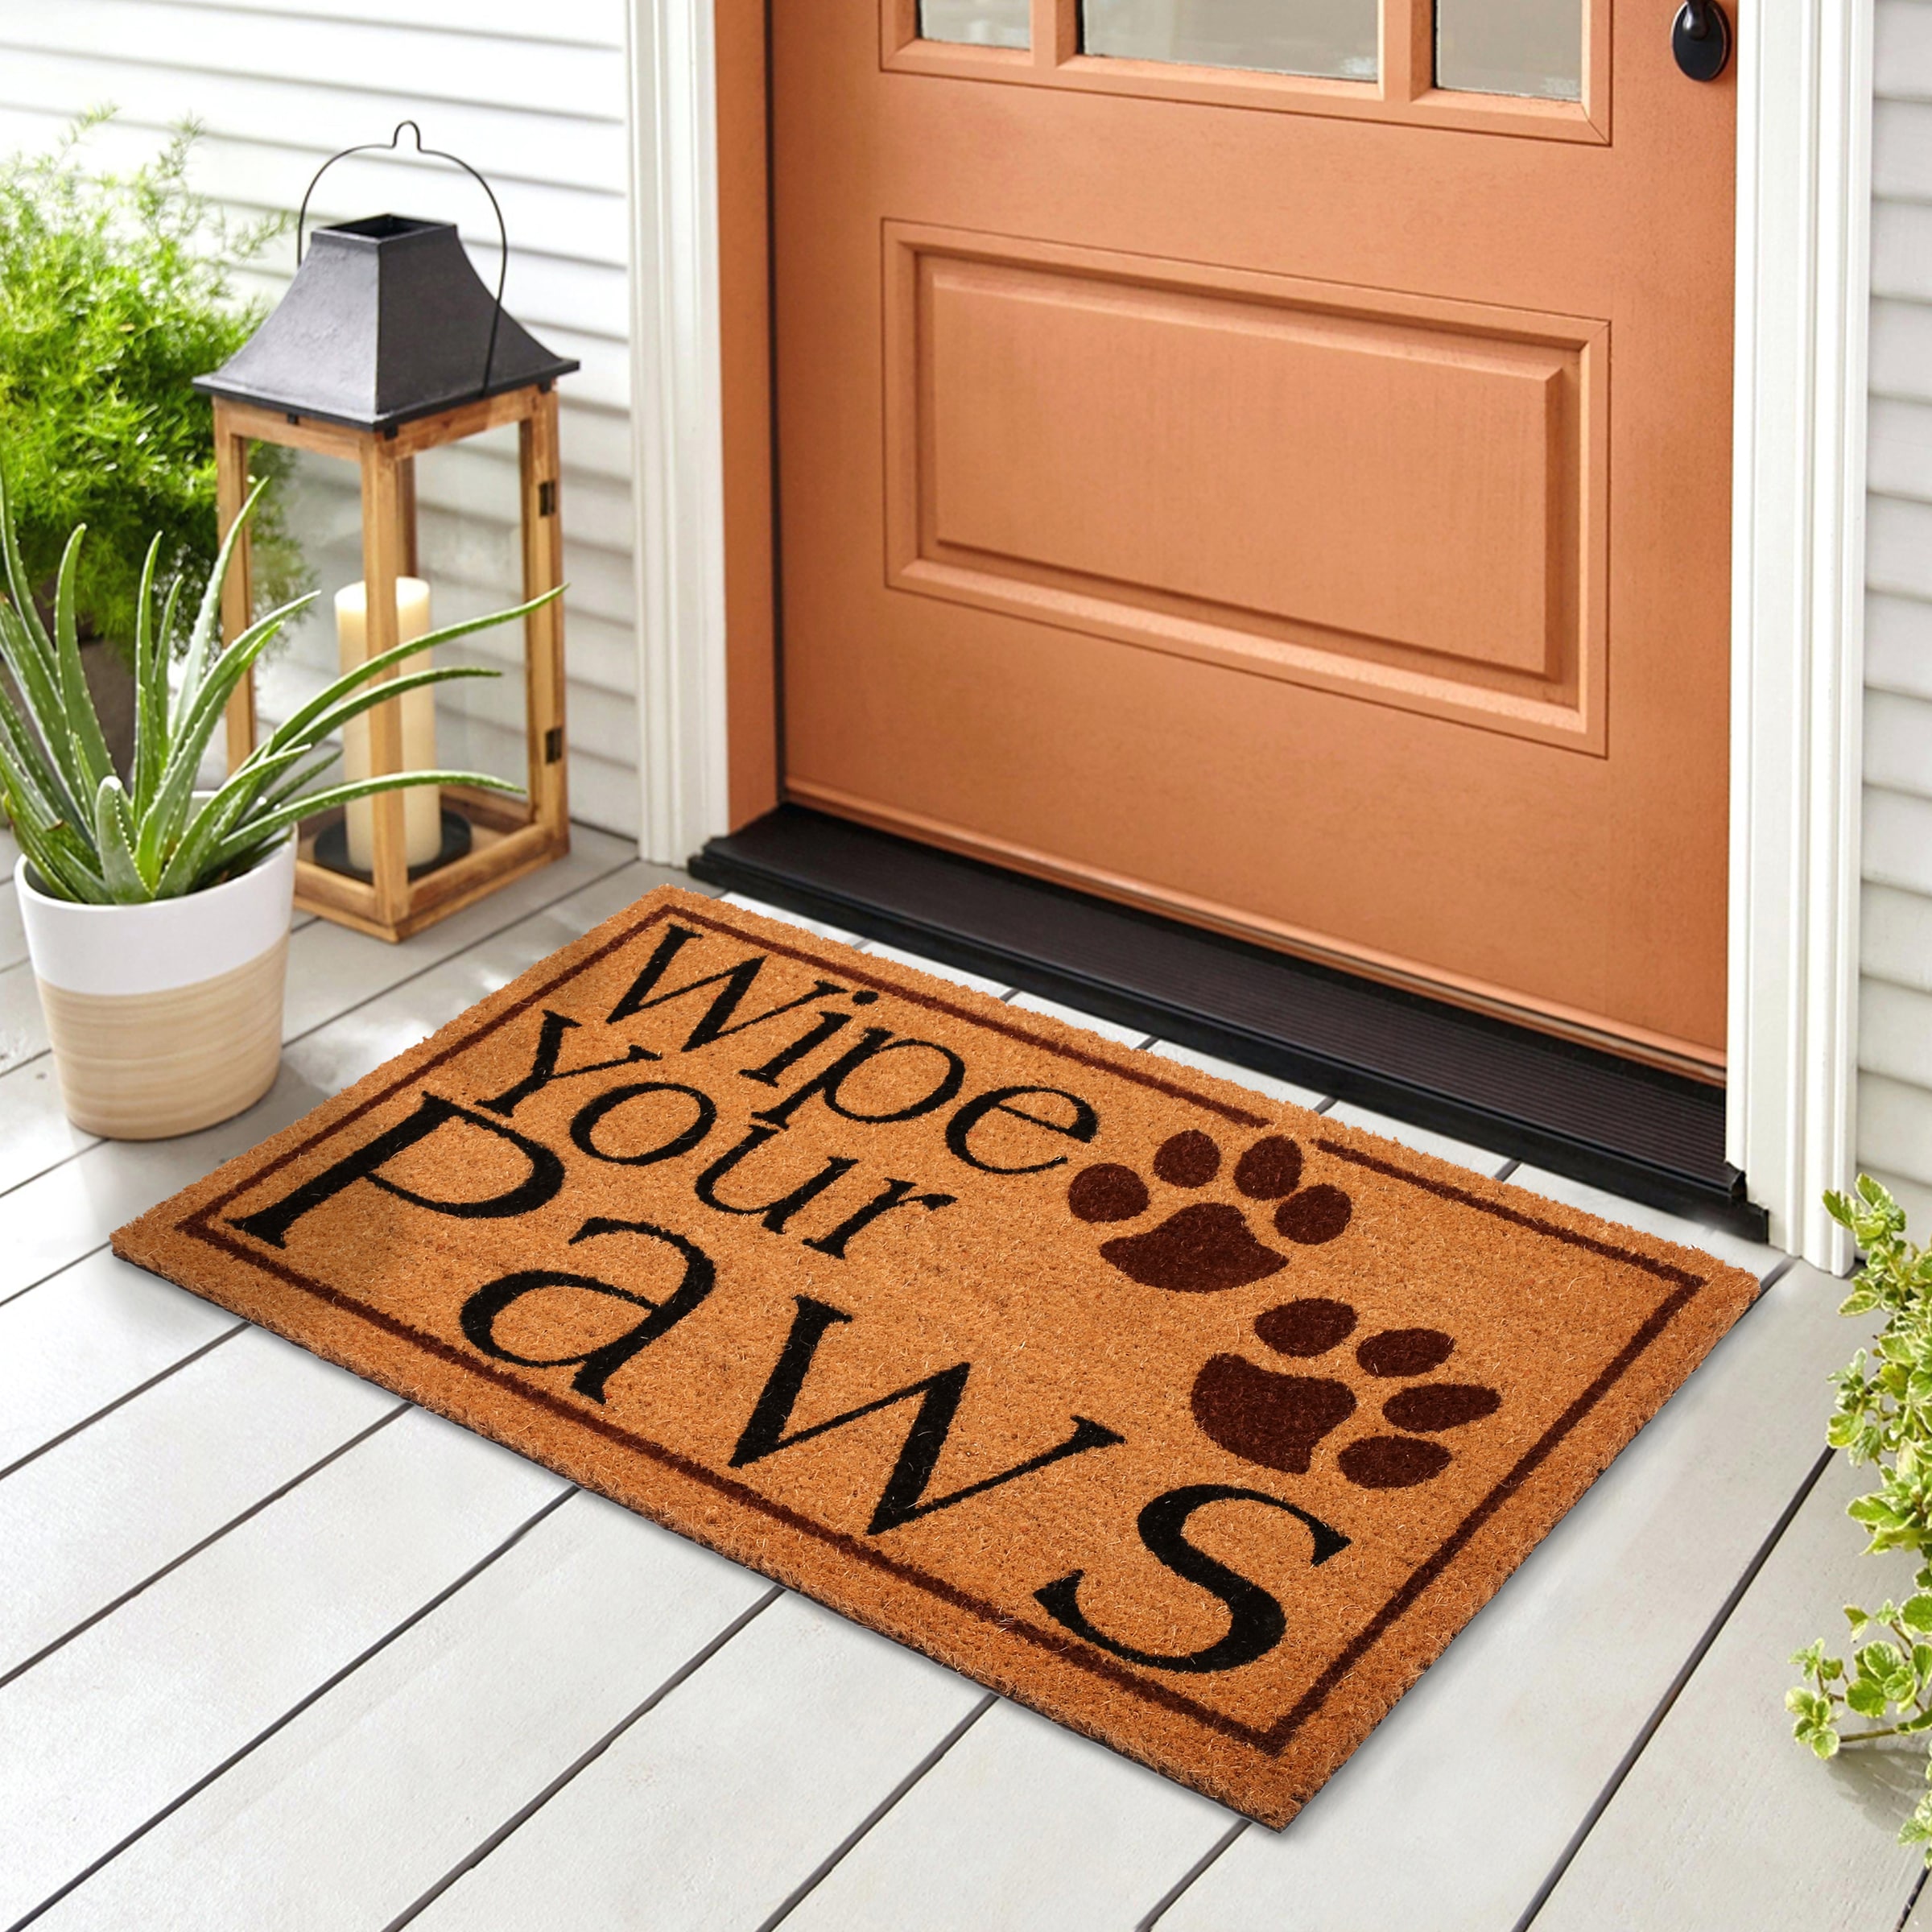 My Doggy Place Dog Mat for Muddy Paws, Washable Dog Door Mat, Light Gray, L  